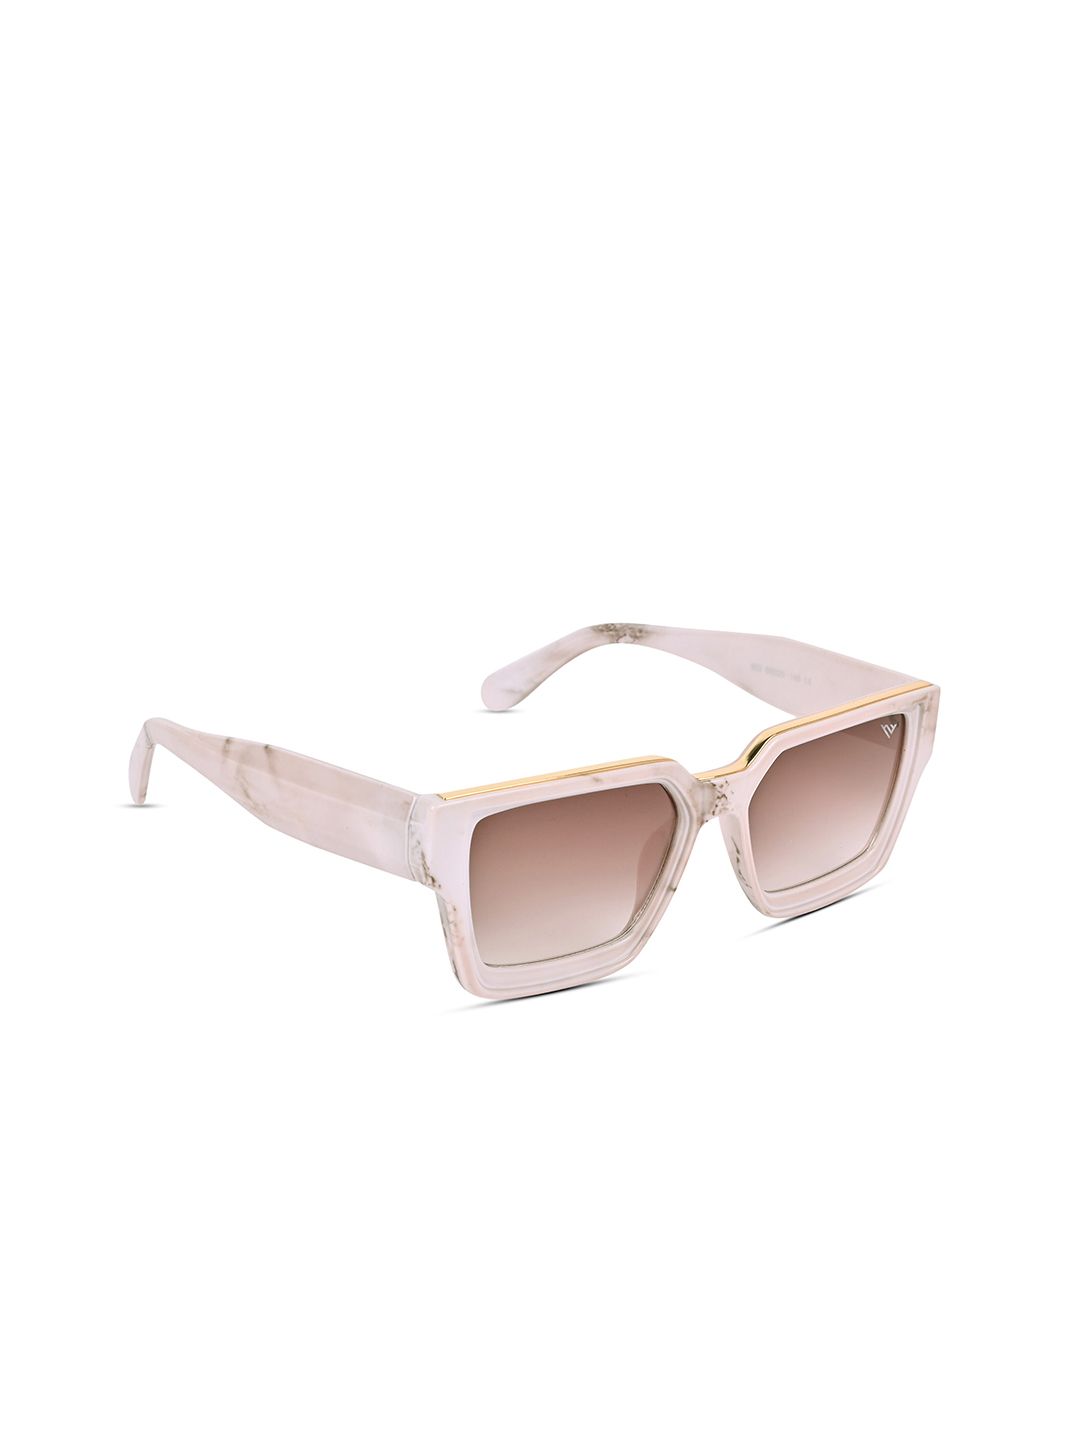 Voyage Unisex Brown Lens & White Wayfarer Sunglasses with UV Protected Lens Price in India